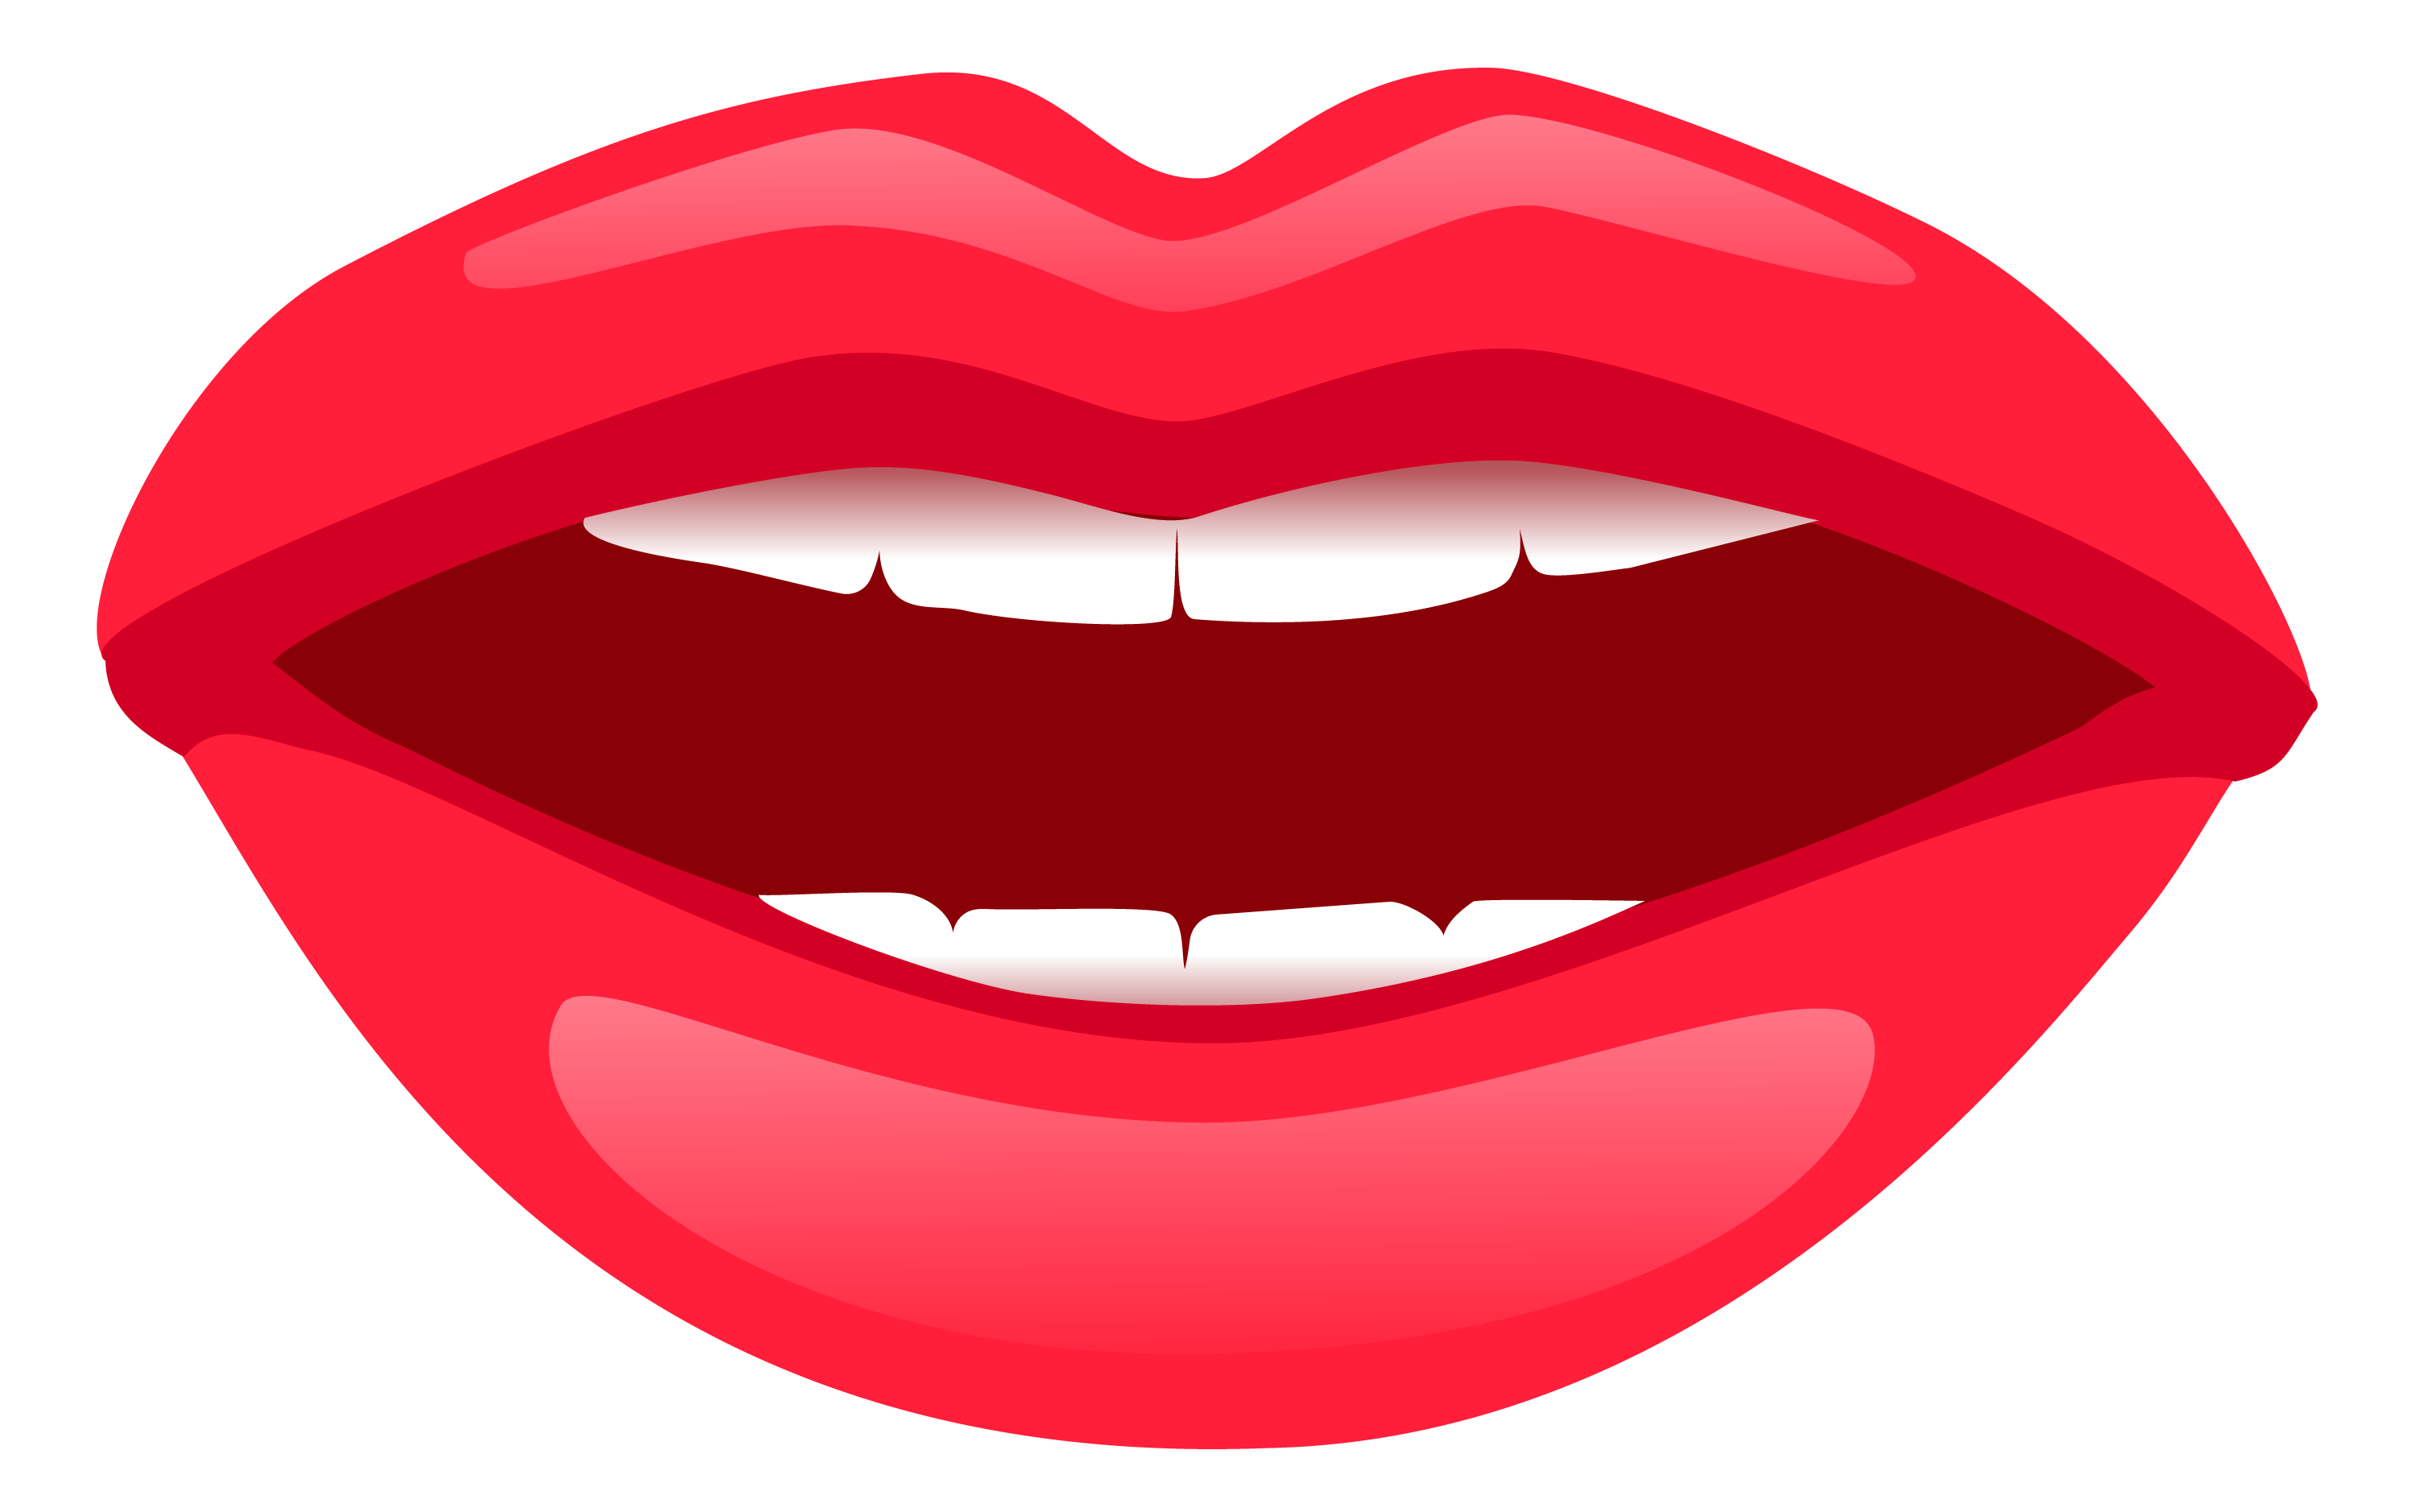 Mouth Talking PNG HD Transparent Mouth Talking HD.PNG Images. | PlusPNG